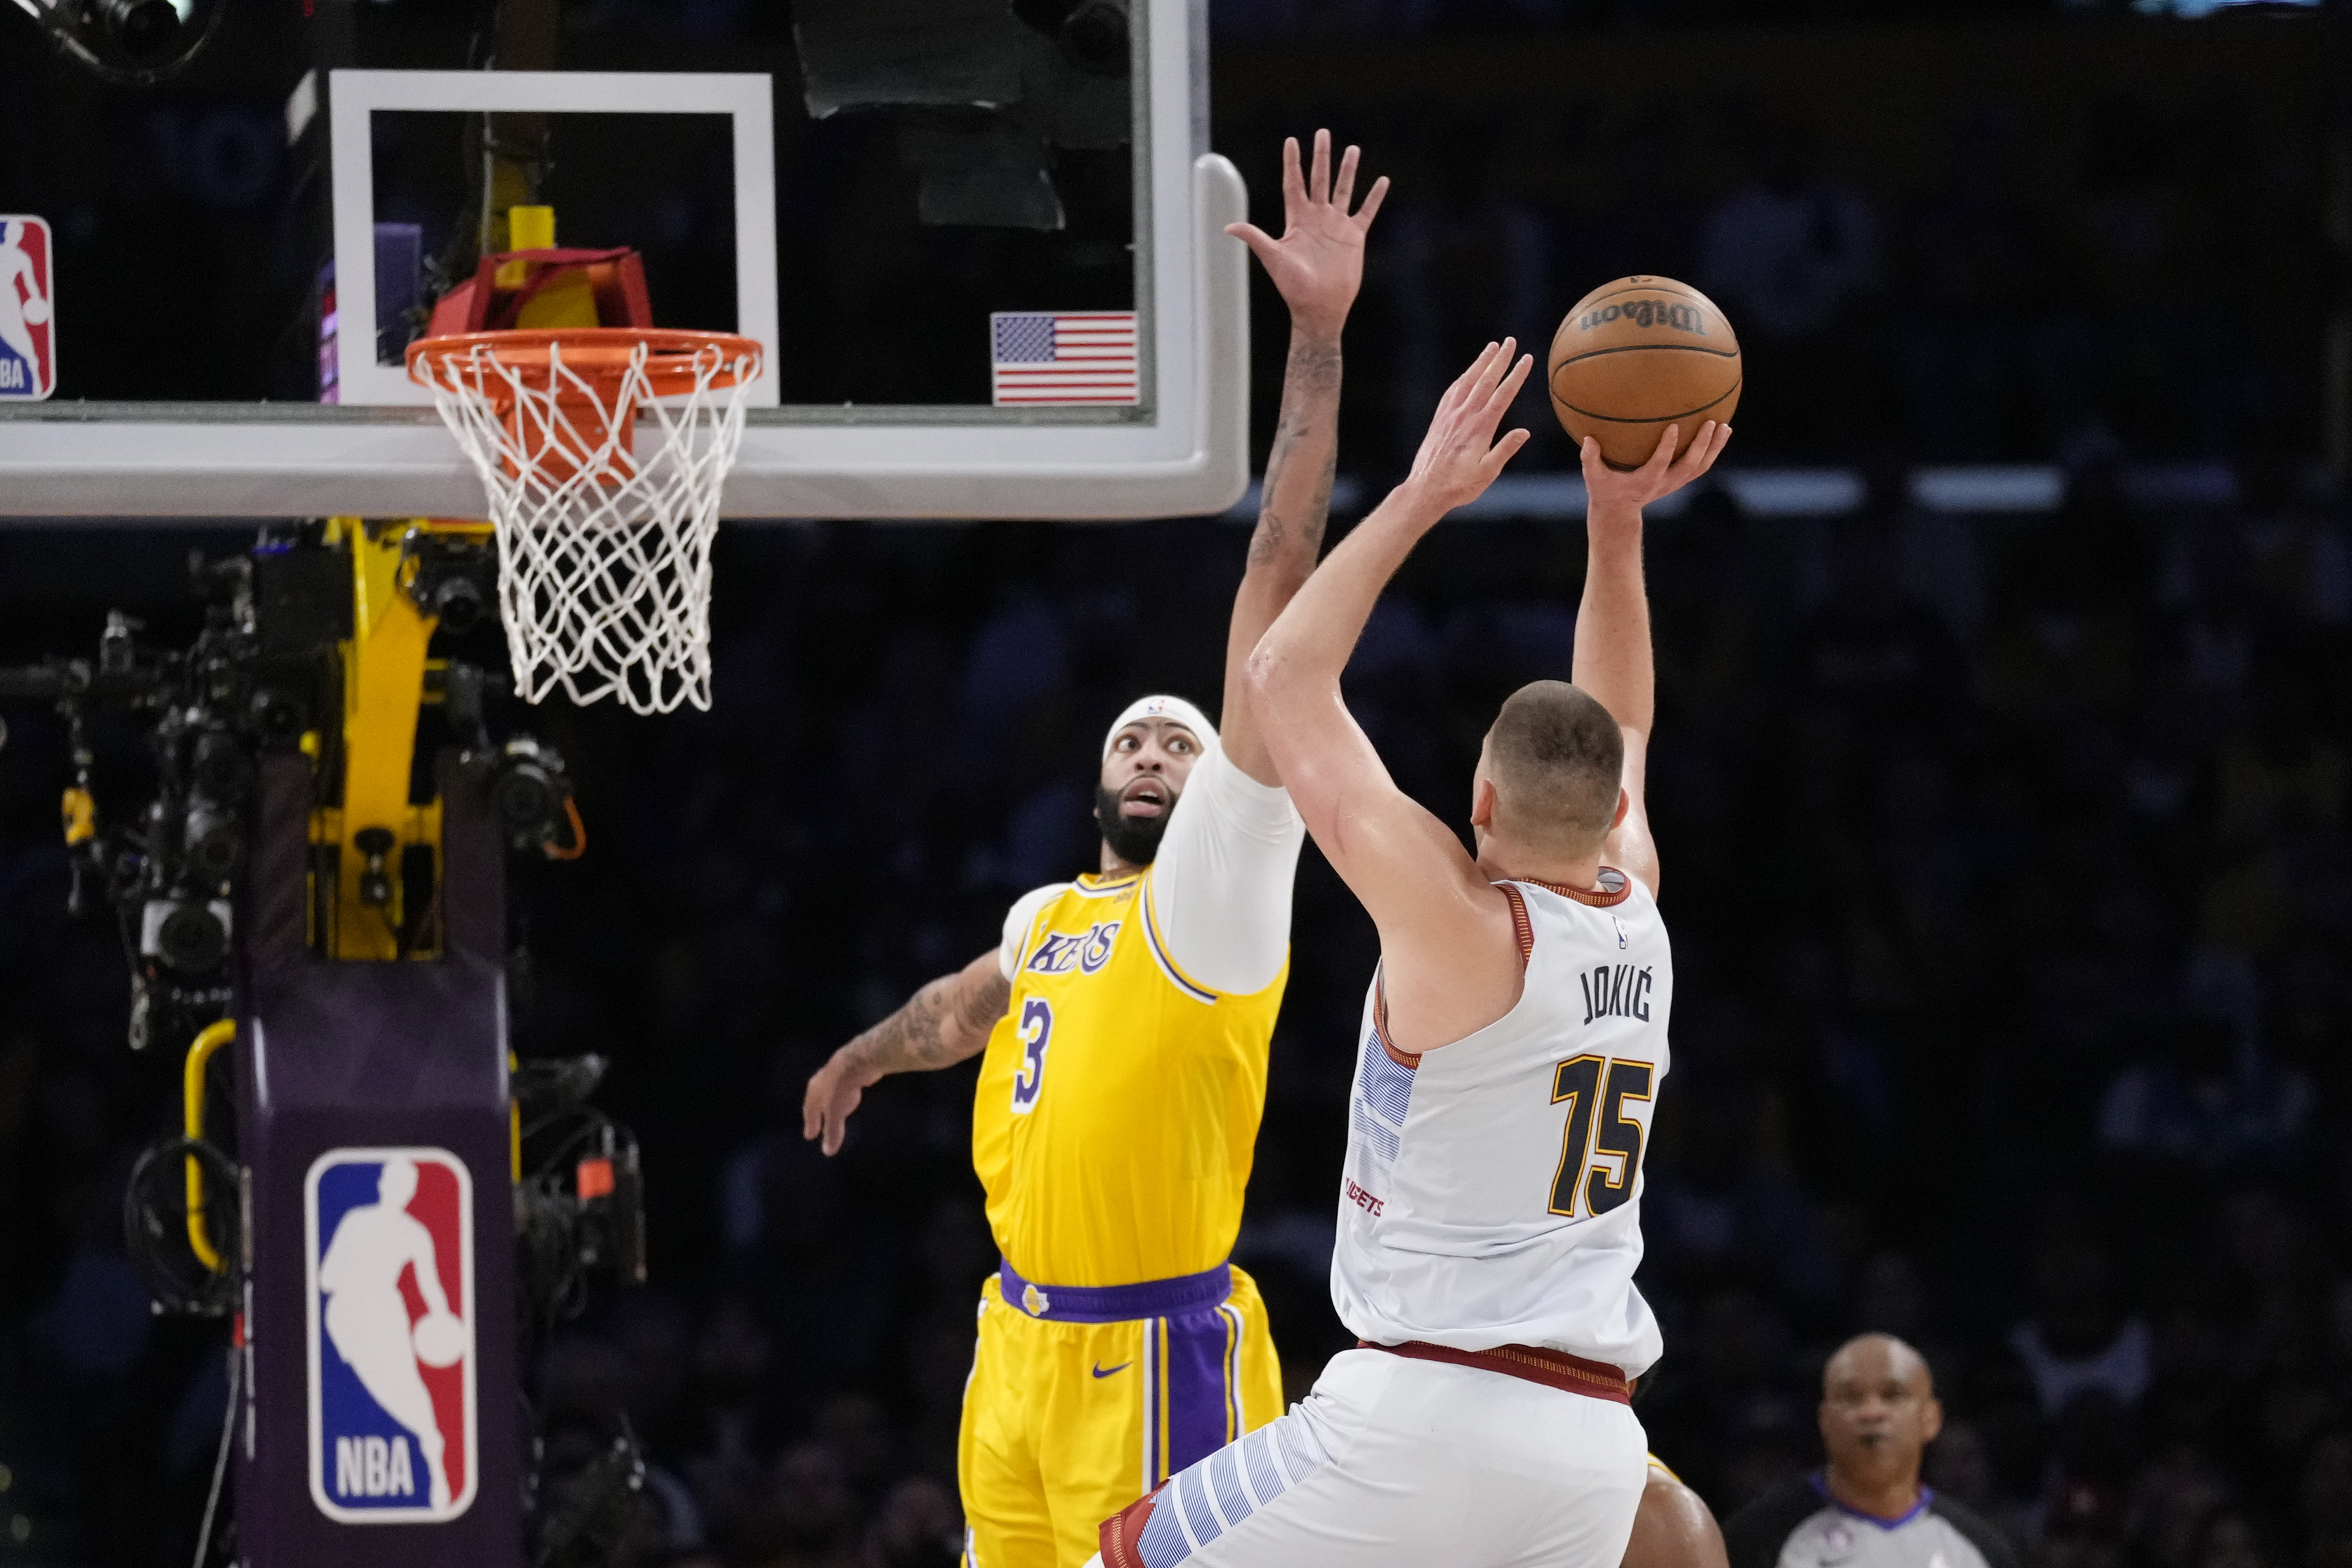 nba: NBA Monday games: Live streaming, TV, schedule, injuries, elite  players, where to watch - The Economic Times